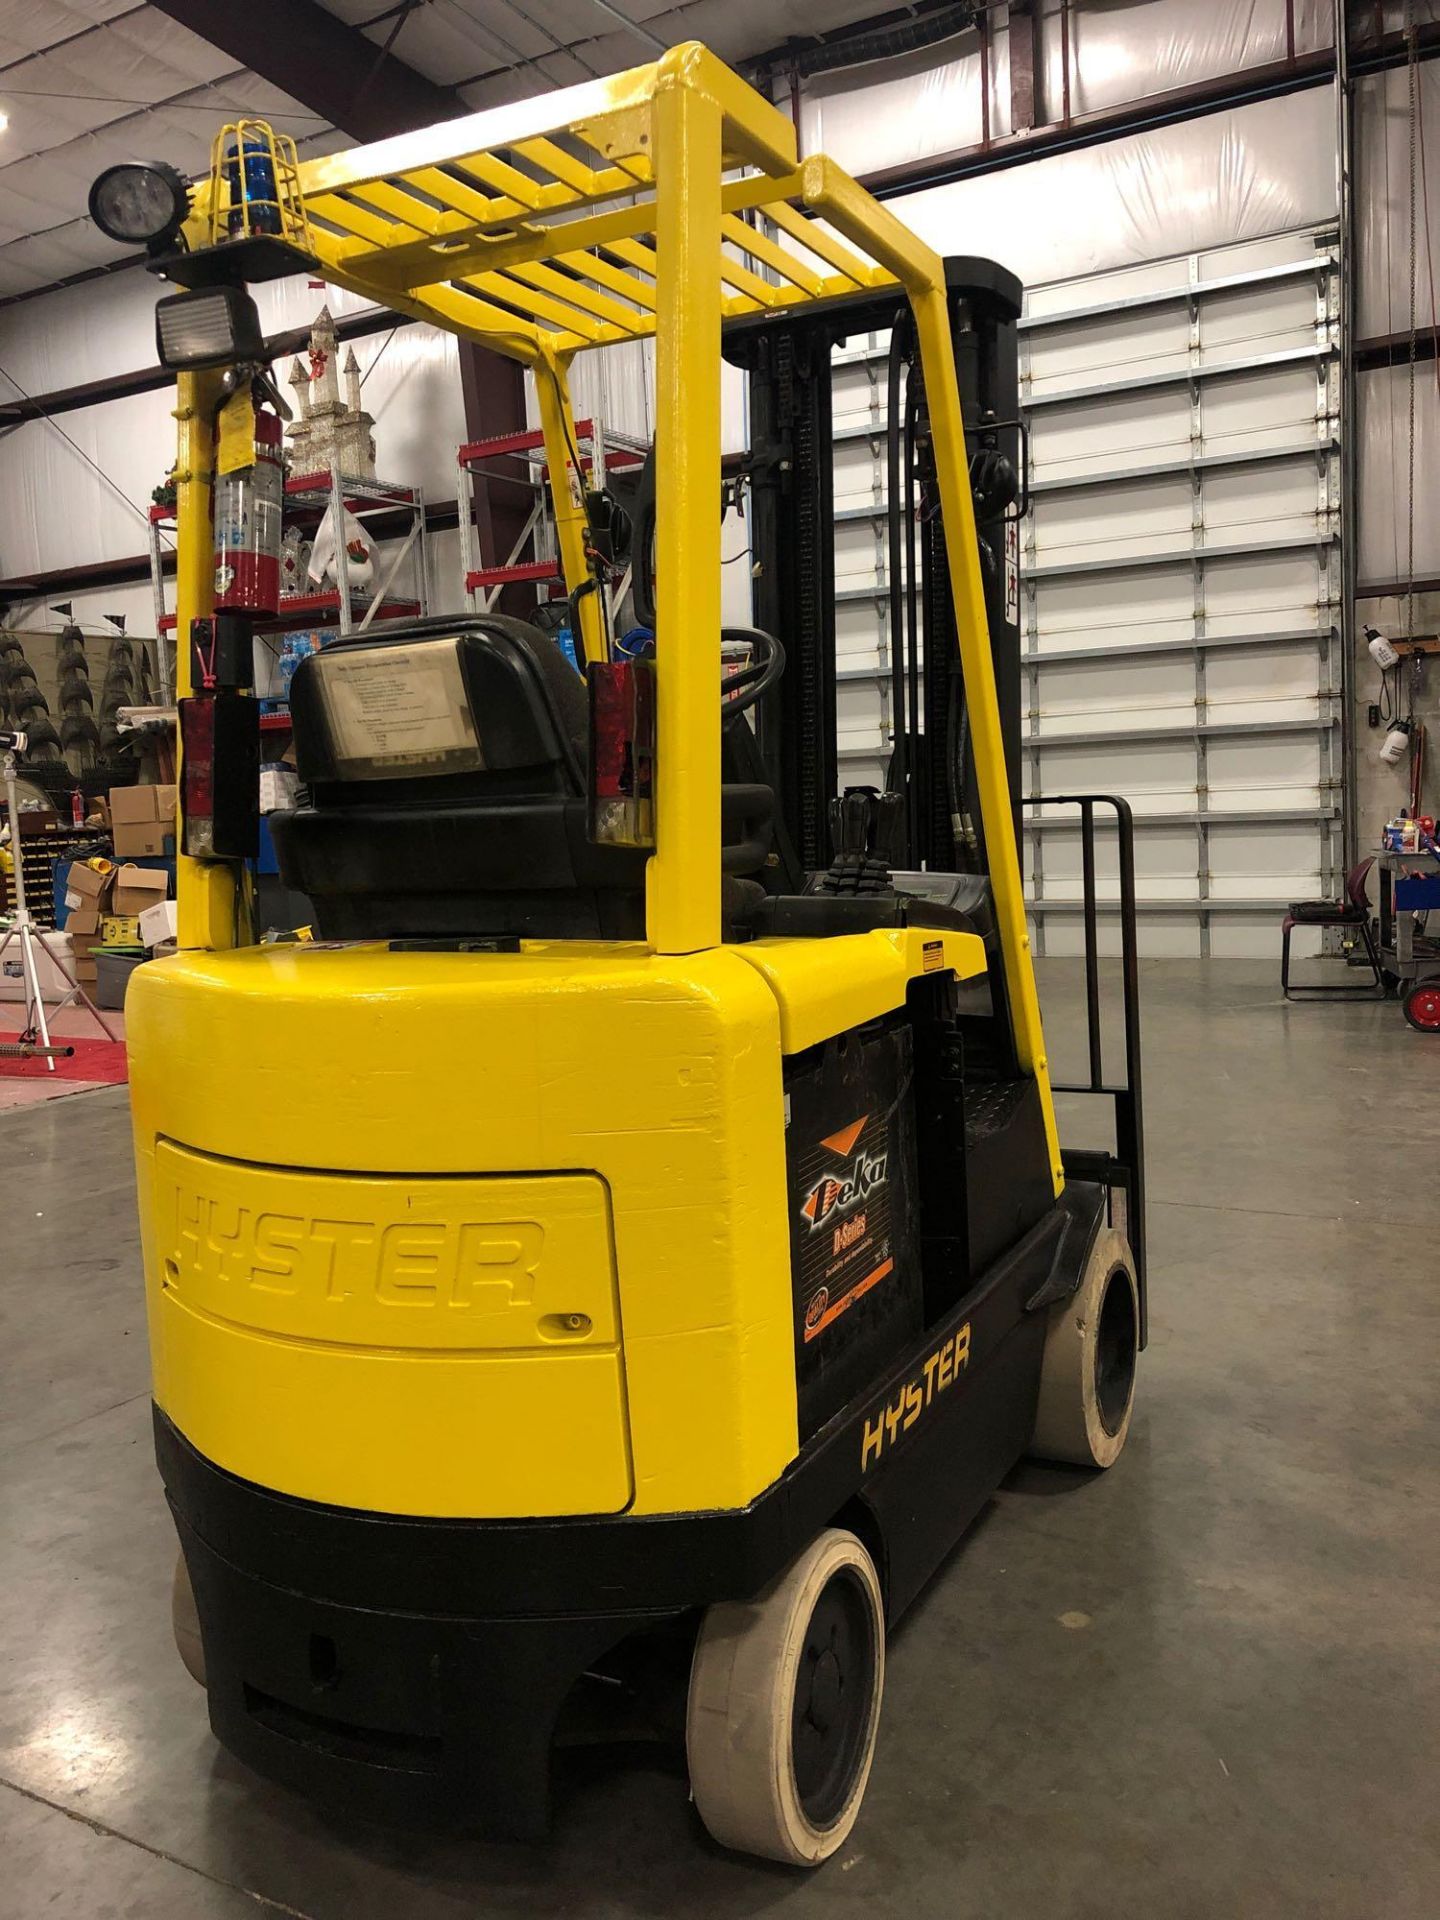 HYSTER ELECTRIC FORKLIFT MODEL E40XM25, 4,000 LB CAPACITY, 212.6" HEIGHT CAPACITY - Image 3 of 6